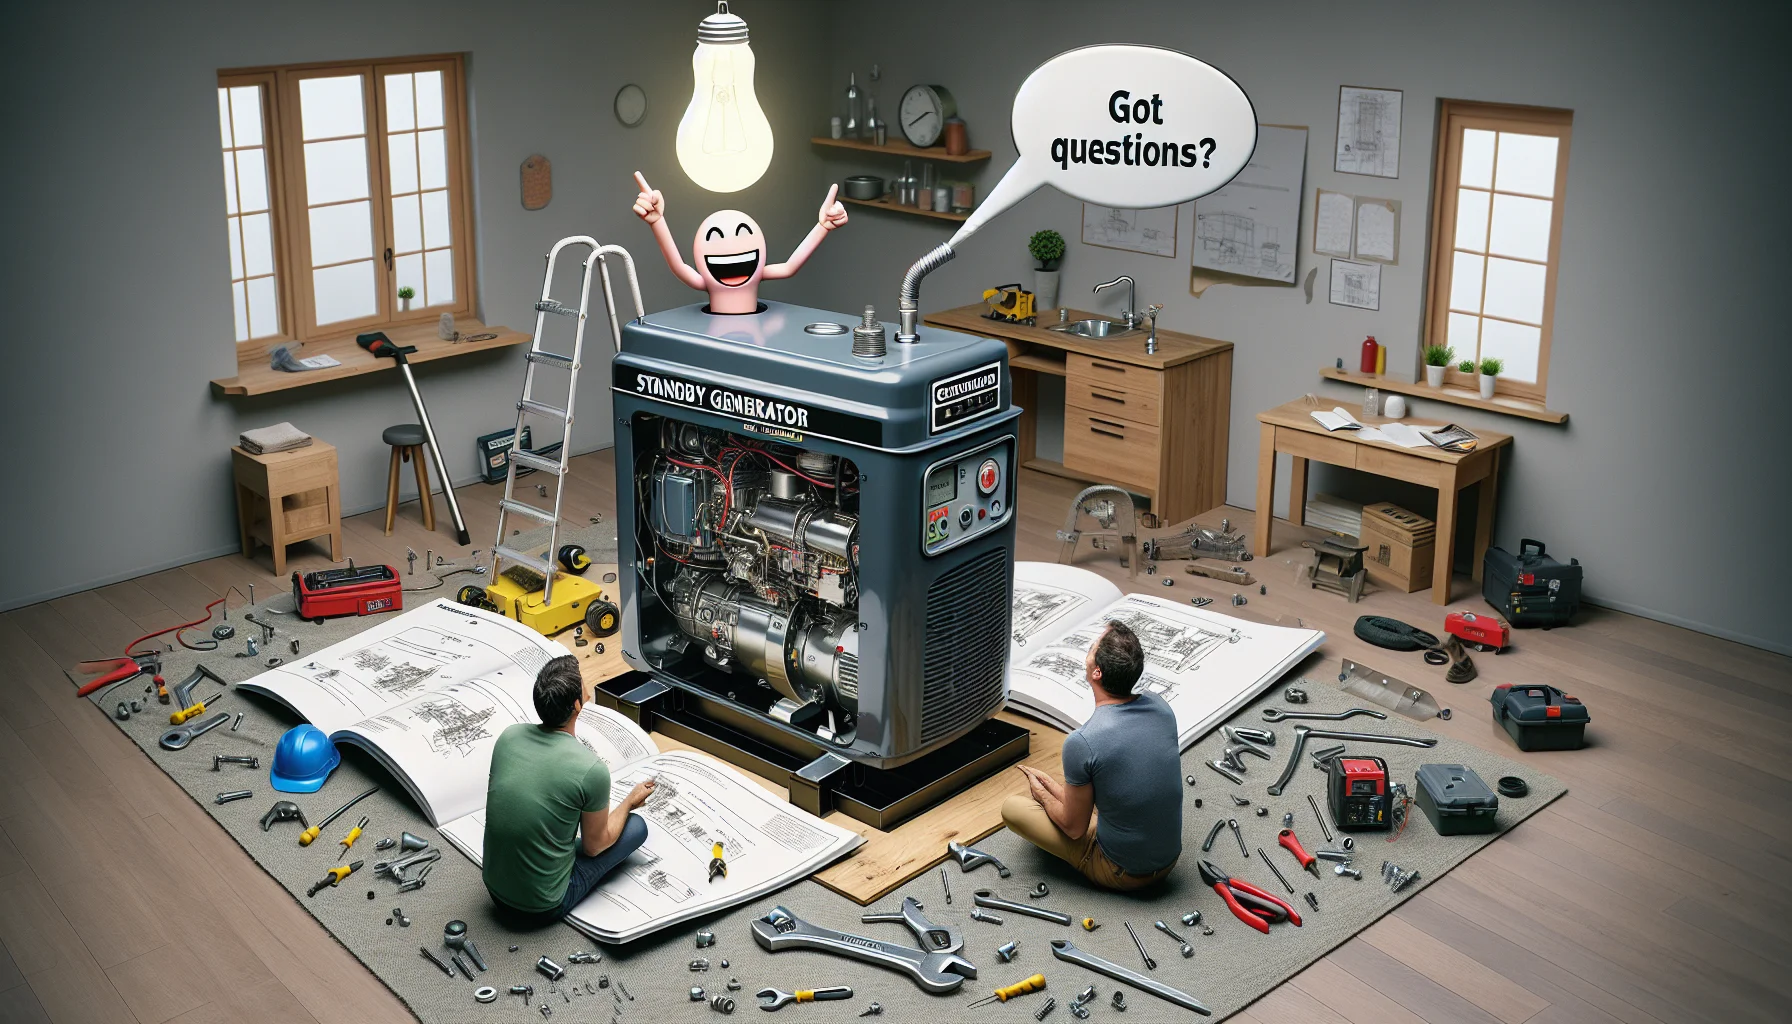 Create a playful and humorous situation in a residential setting where people are struggling with a massive instruction manual for a standby generator. The generator stands unconnected surrounded by various parts and tools. The diagram of the generator in the manual is laughing while pointing a finger towards a light bulb which flickers overhead. An advice bubble popping from the generator reads 'Got questions?'. The scene should encapsulate the confusion and hilarity that often comes along with often overlooked FAQ's about electricity generation on standby generators.